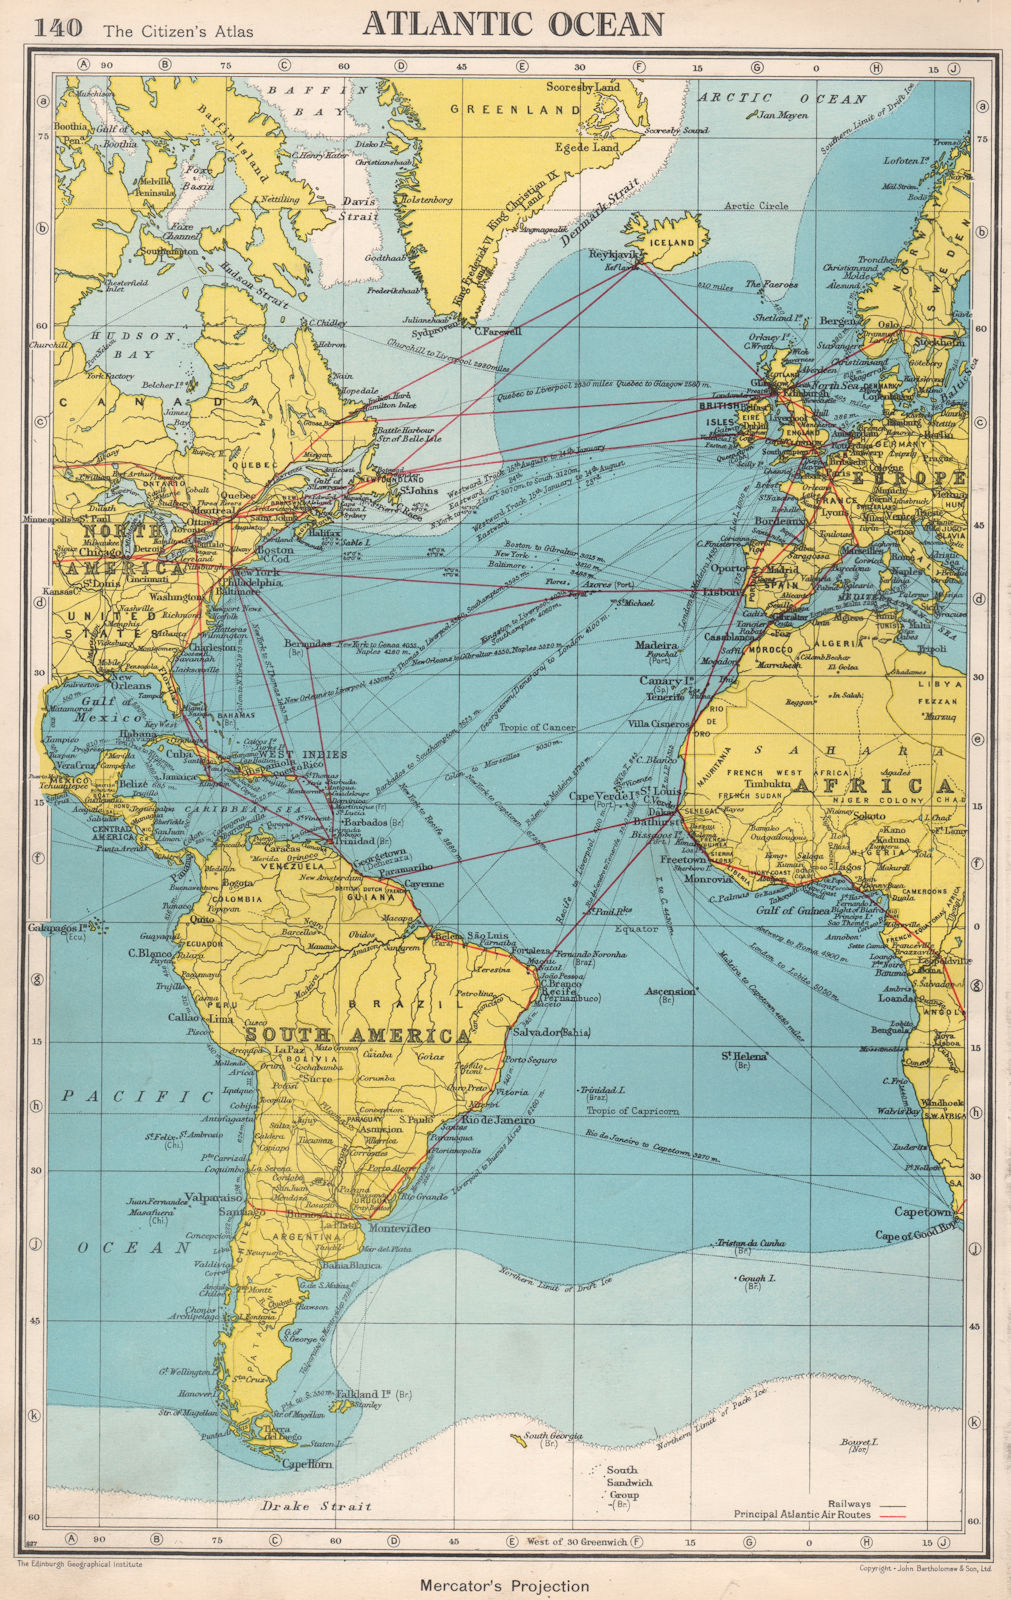 ATLANTIC OCEAN. Shows main air & shipping routes, drift/pack ice limits 1952 map